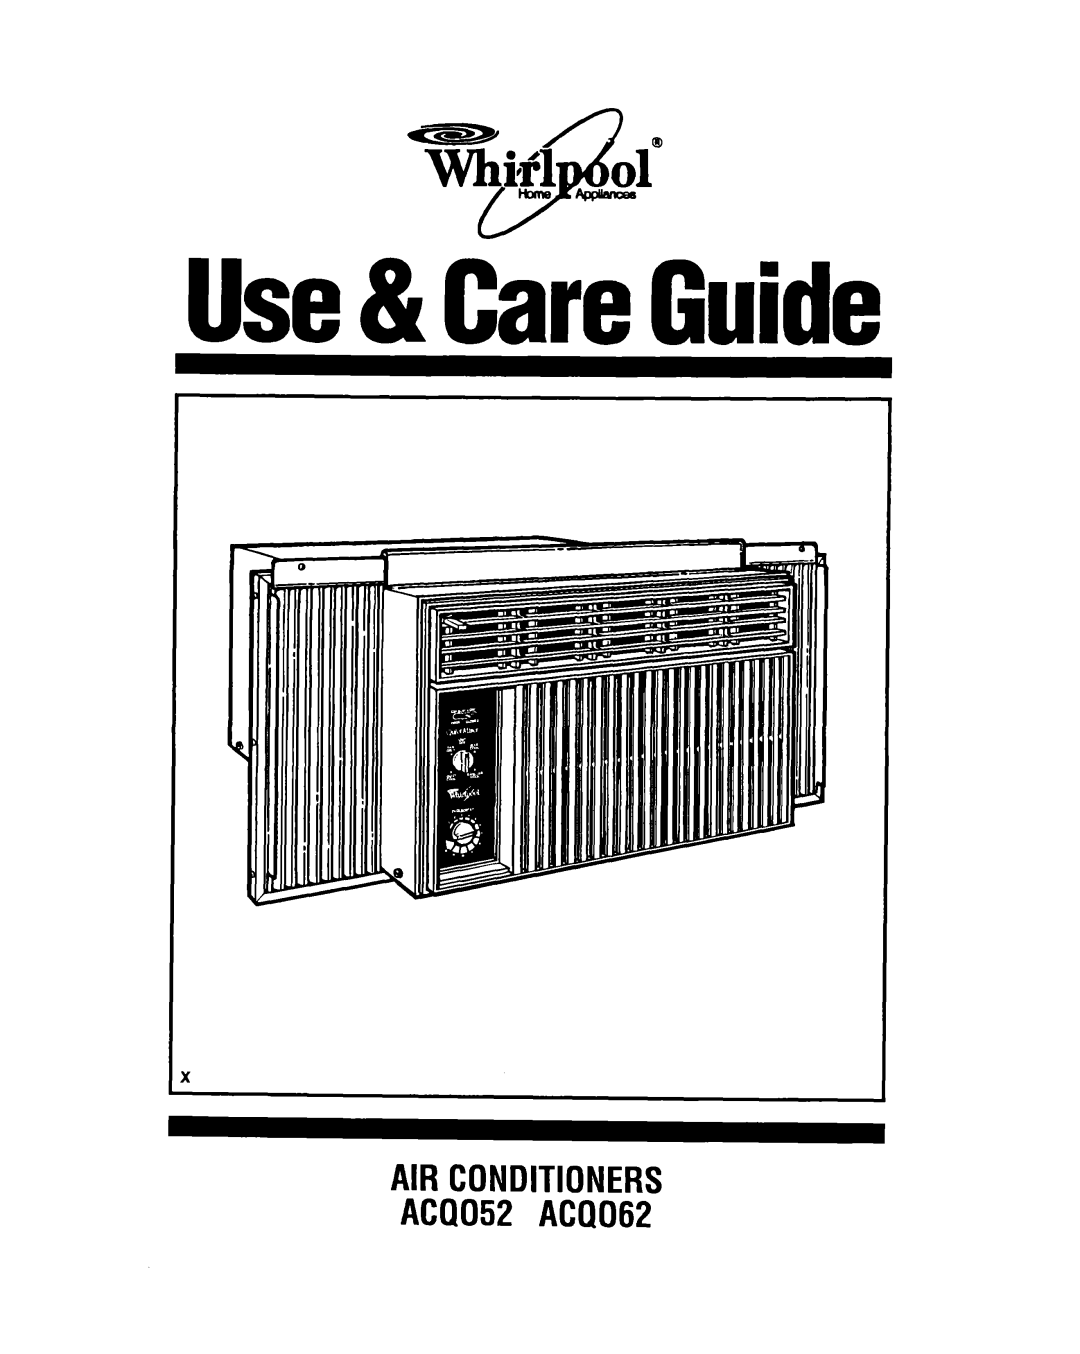 Whirlpool AMQ062 manual Use& Cari Guide, h 01 4a, AIRCONDITIONERS ACQ052 AM062 